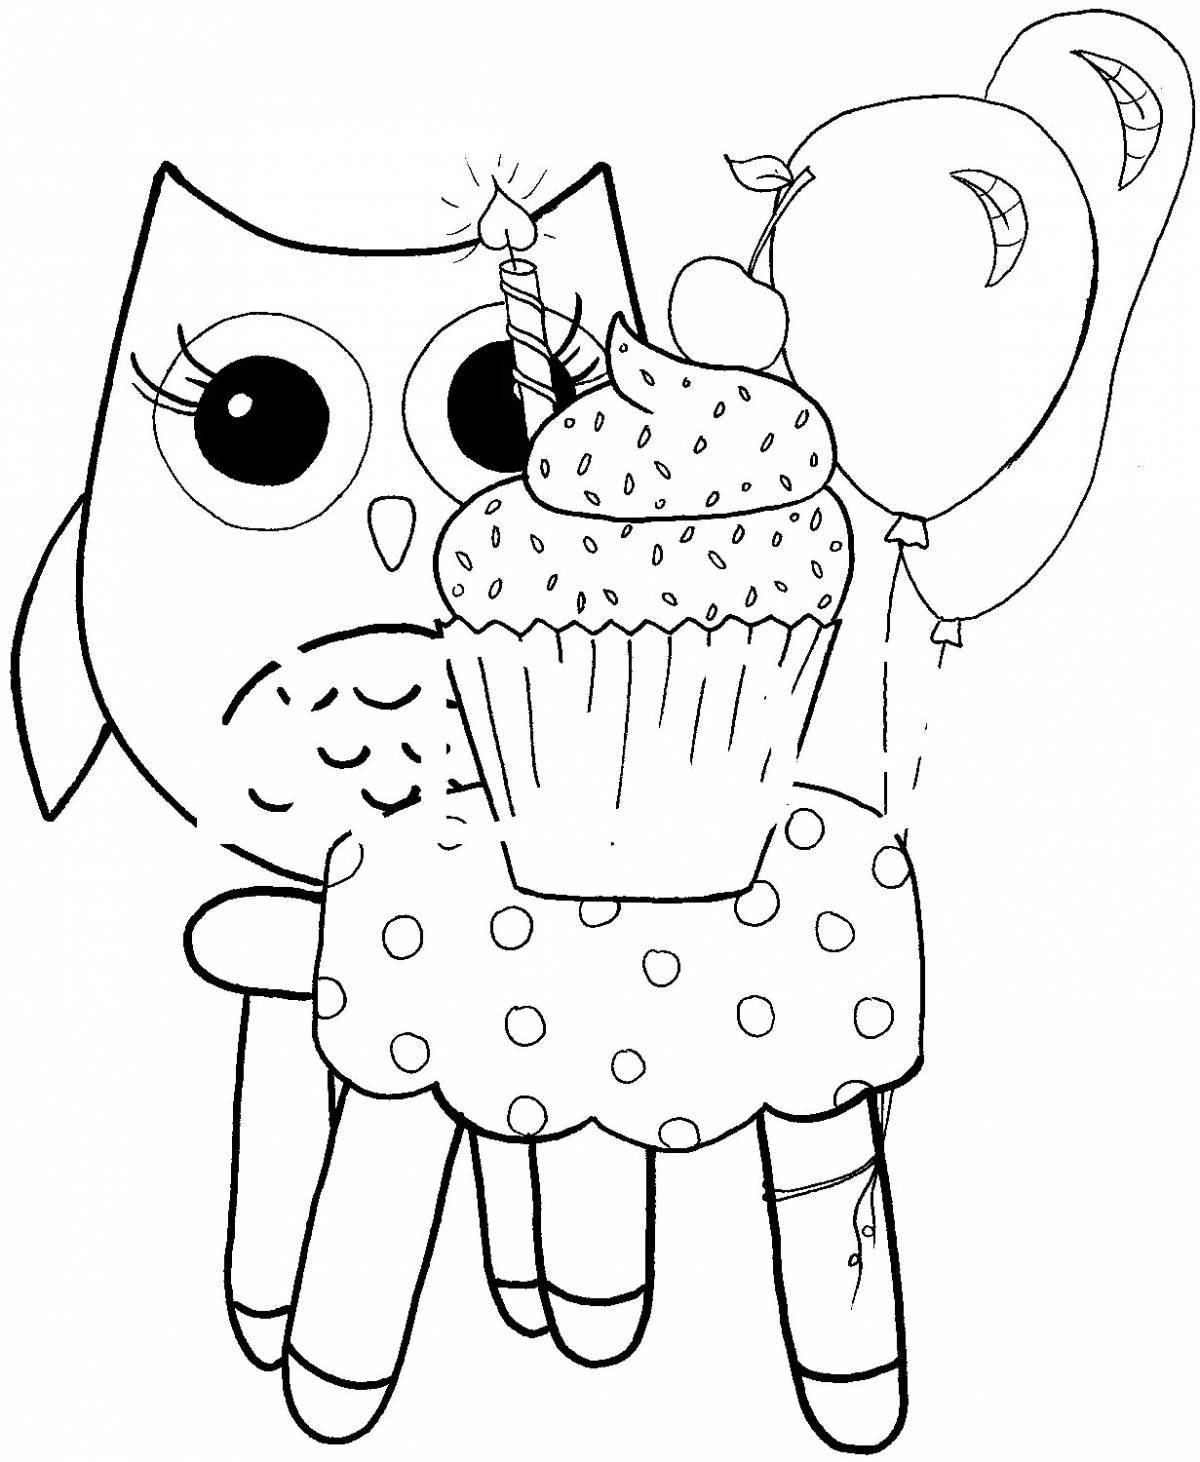 Glowing happy meal coloring page